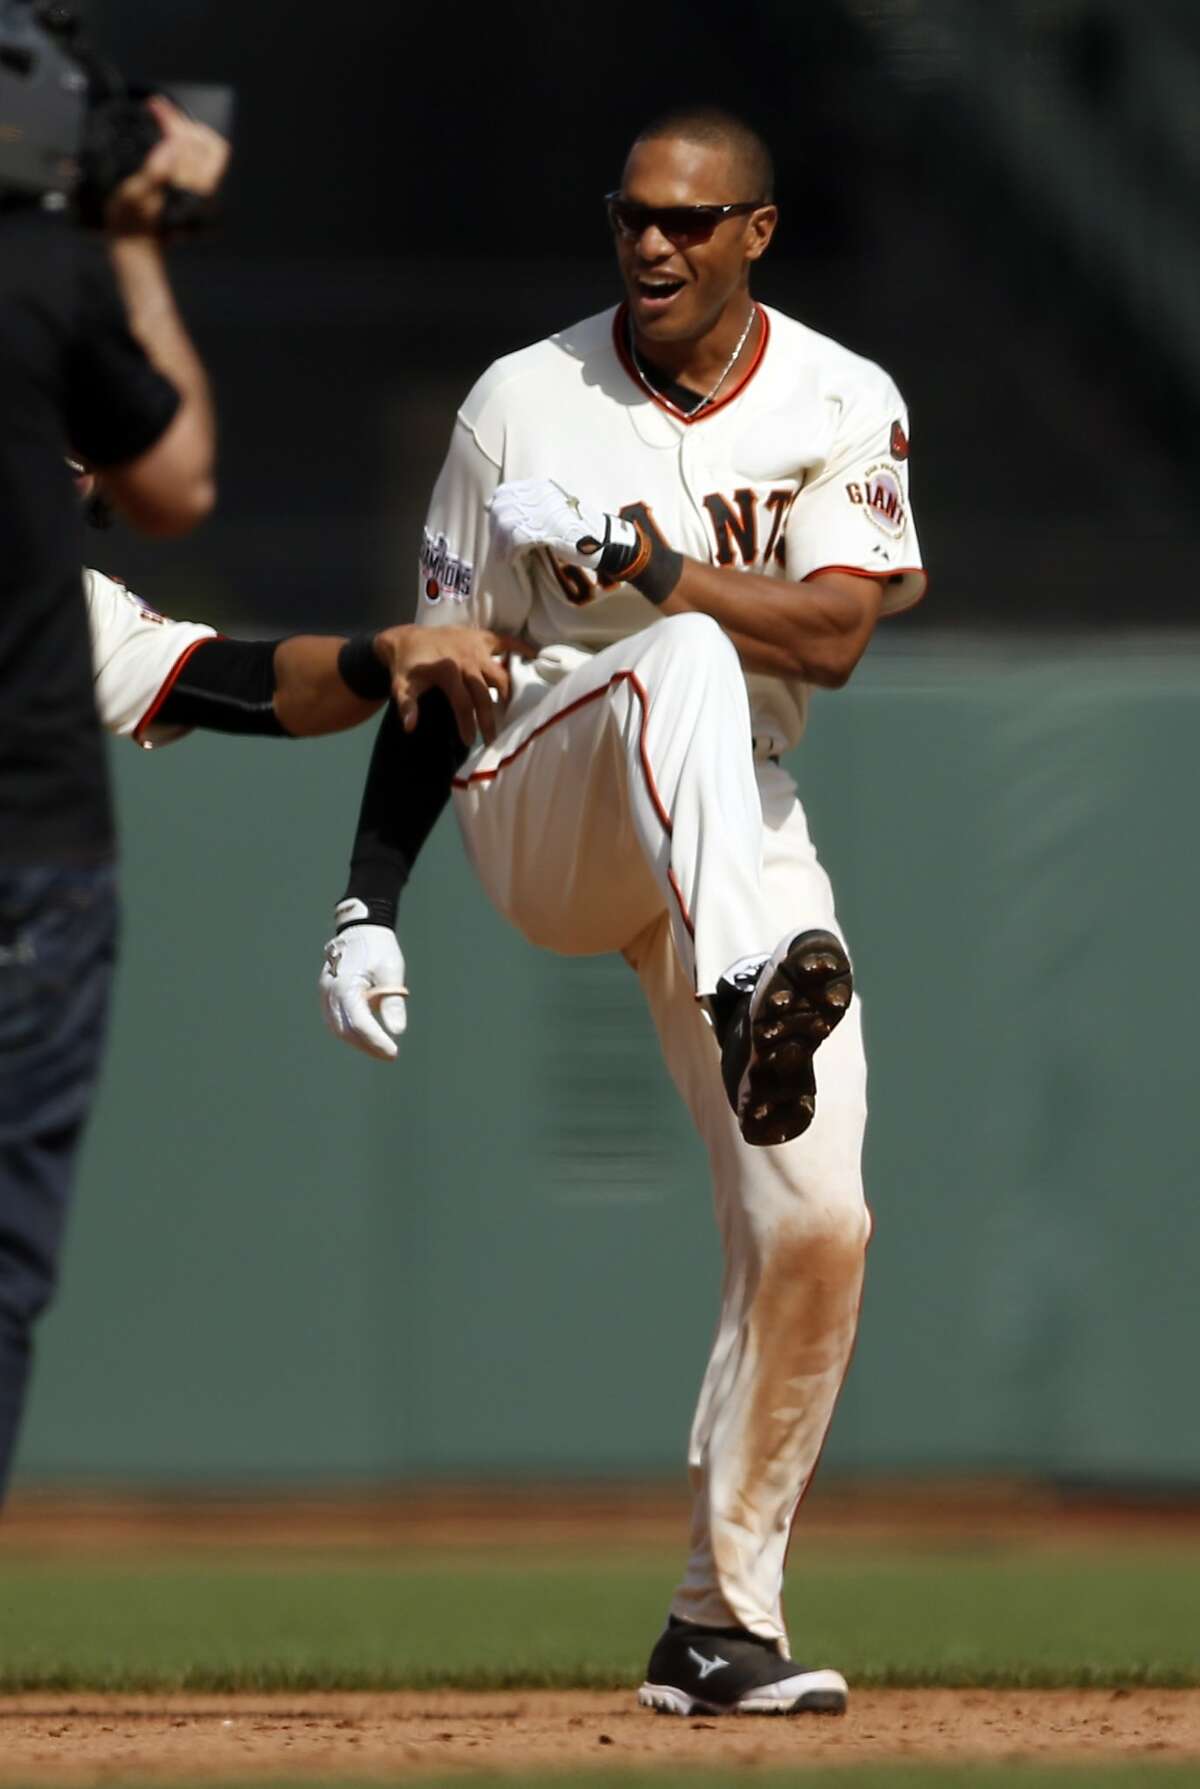 San Francisco Giants' Justin Maxwell celebrates his game-winning single in 10th inning of 3-2 win over Los Angeles Dodgers in MLB game at AT&T Park in San Francisco, Calif., on Thursday, April 23, 2015.